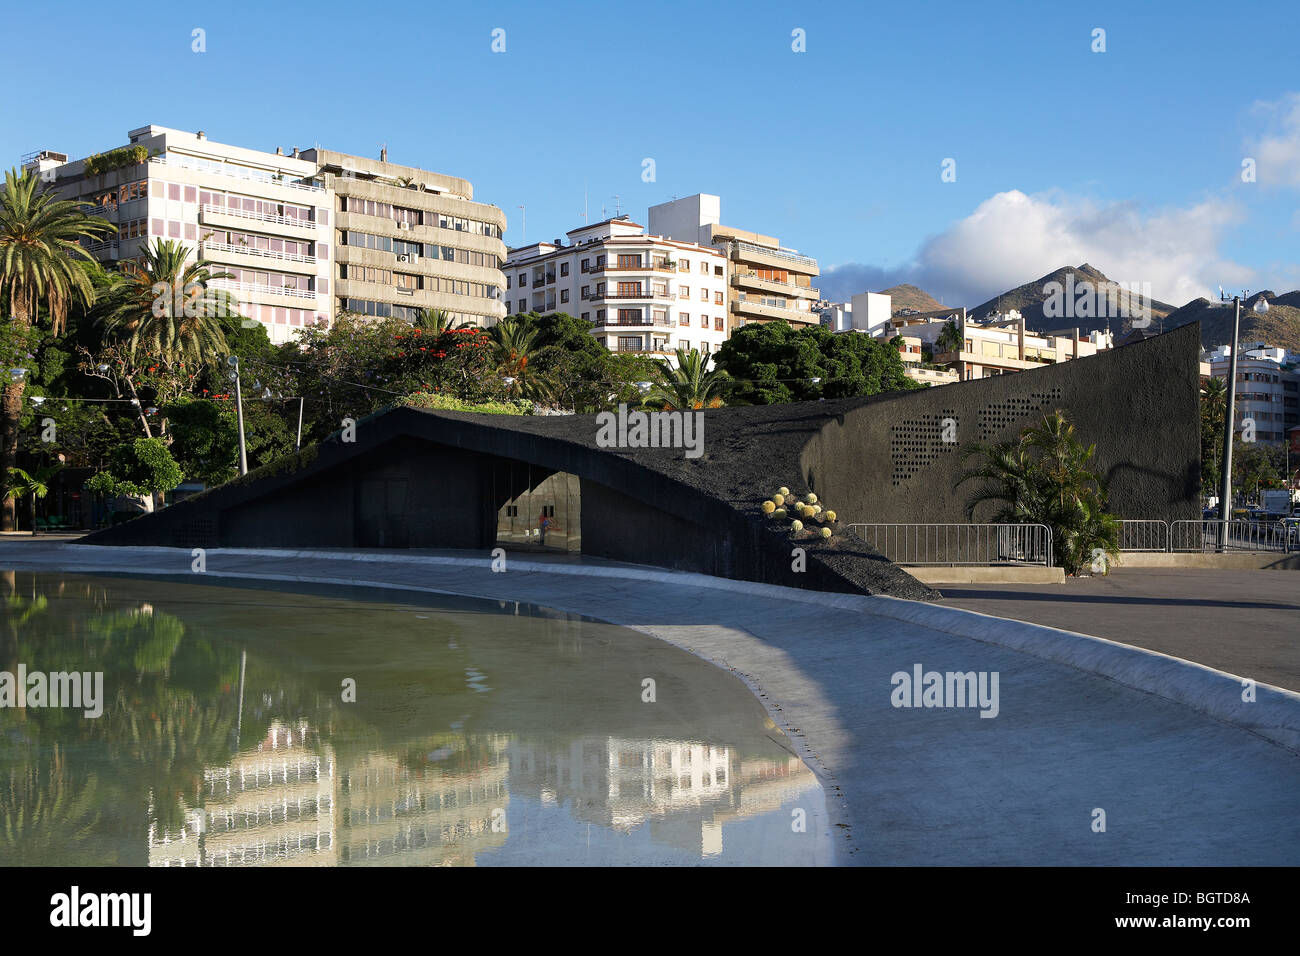 plaza de españa, a general view of the pool and tourist information office with buildings and mountains in the distance Stock Photo